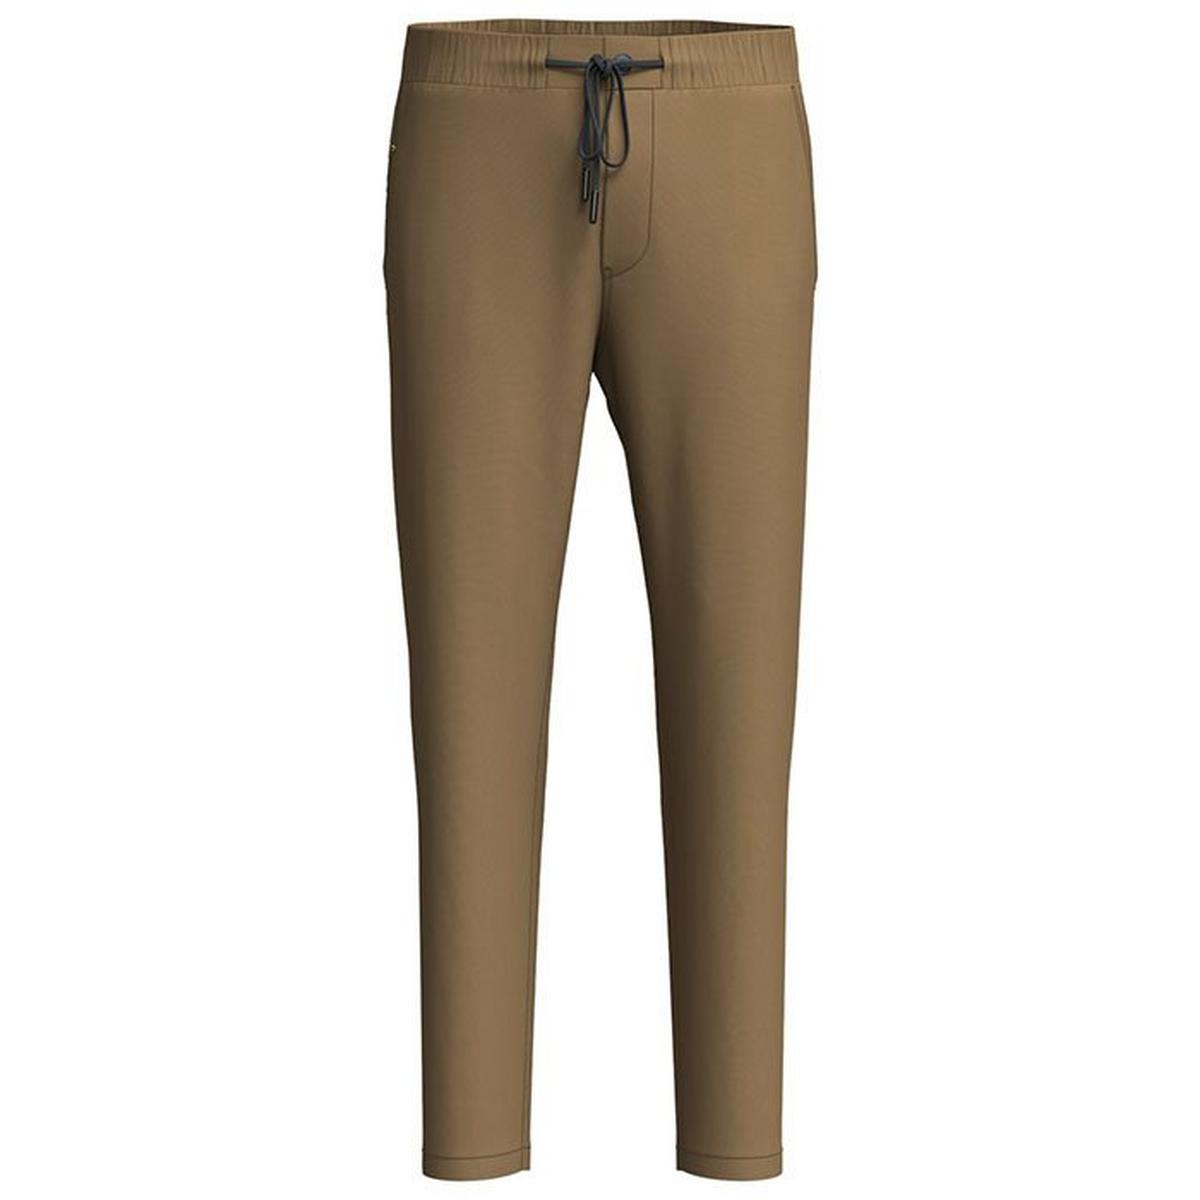 Men's Tapered Fit Chino Pant